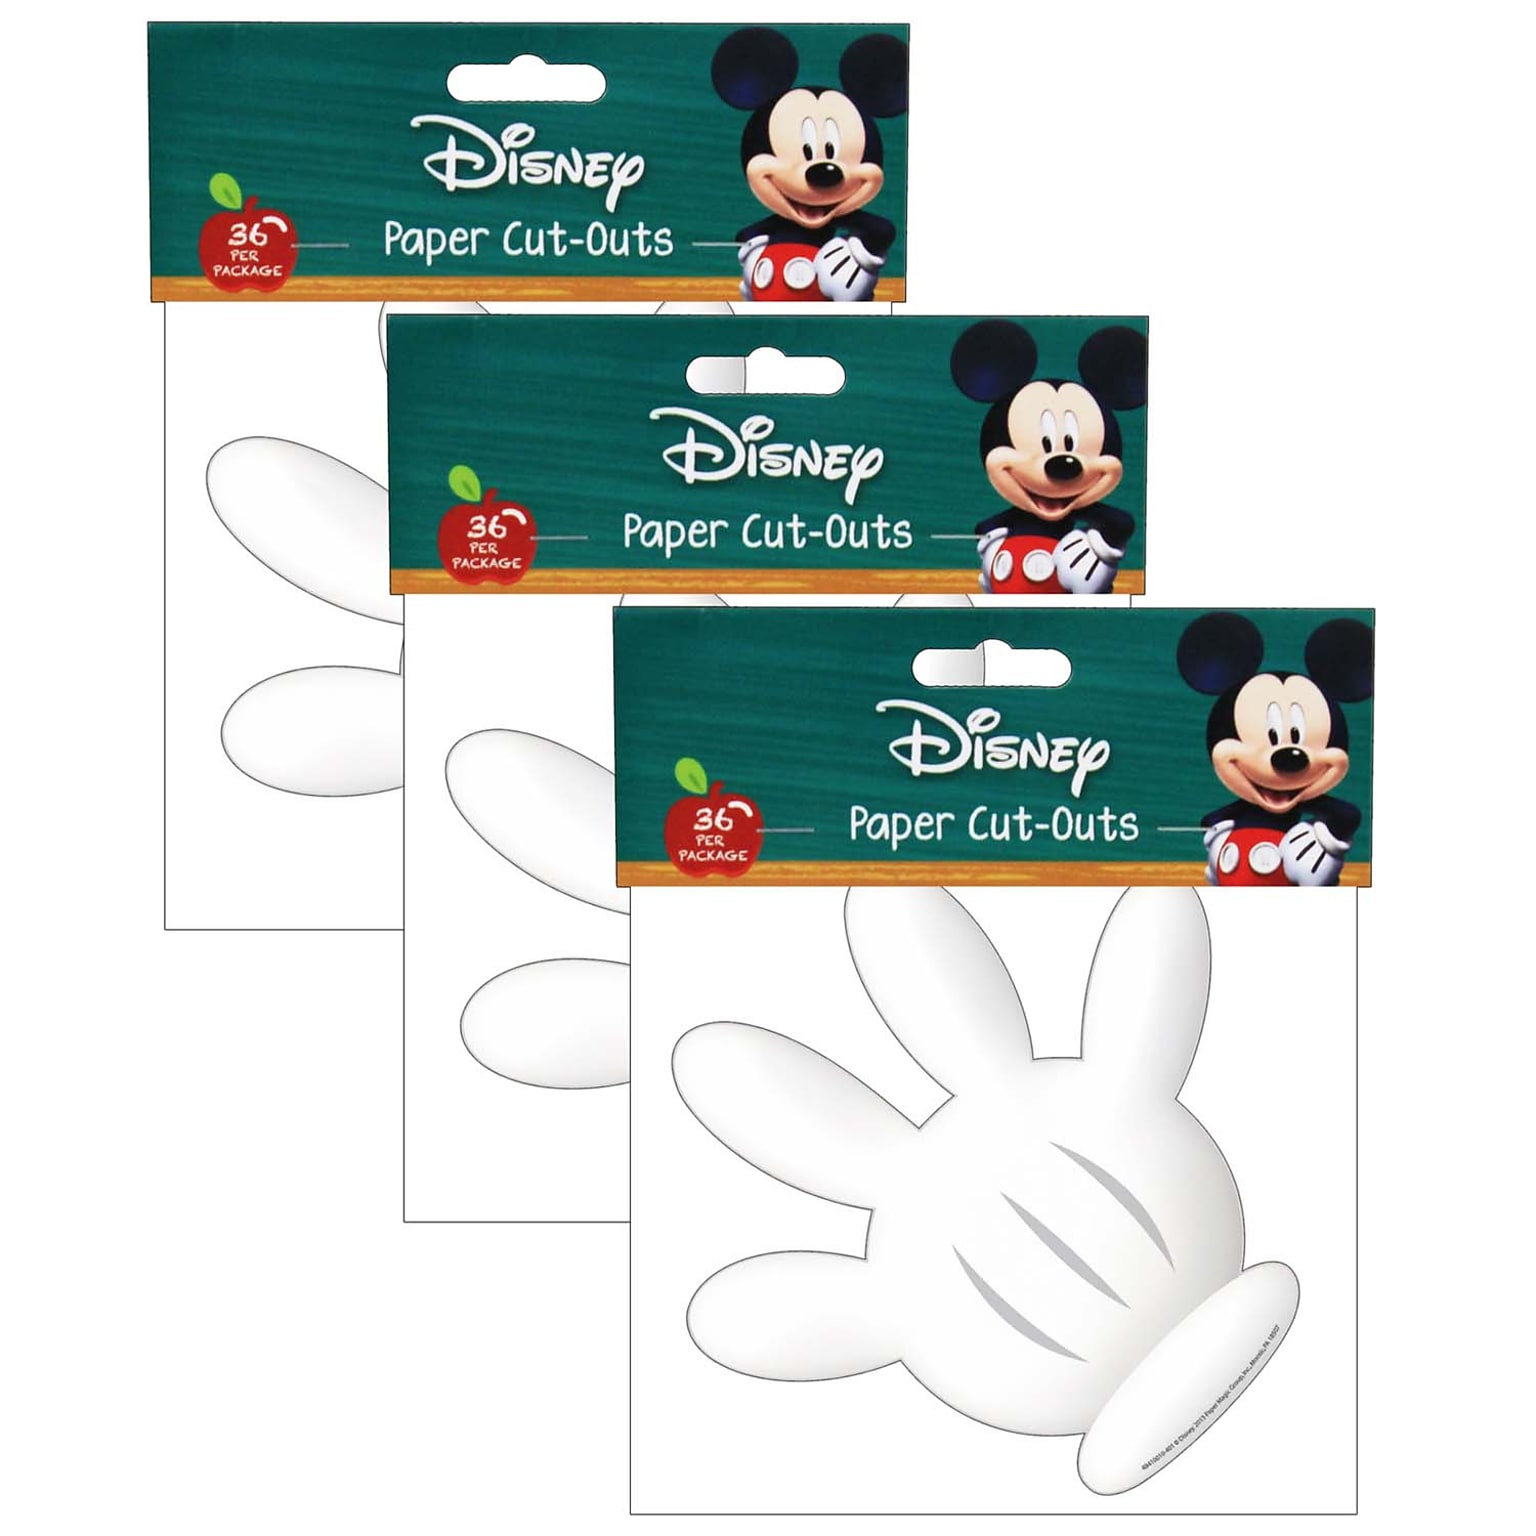 Eureka Mickey Mouse Clubhouse Hand Paper Cut Outs, 36 Per Pack, 3 Packs (EU-841001-3)